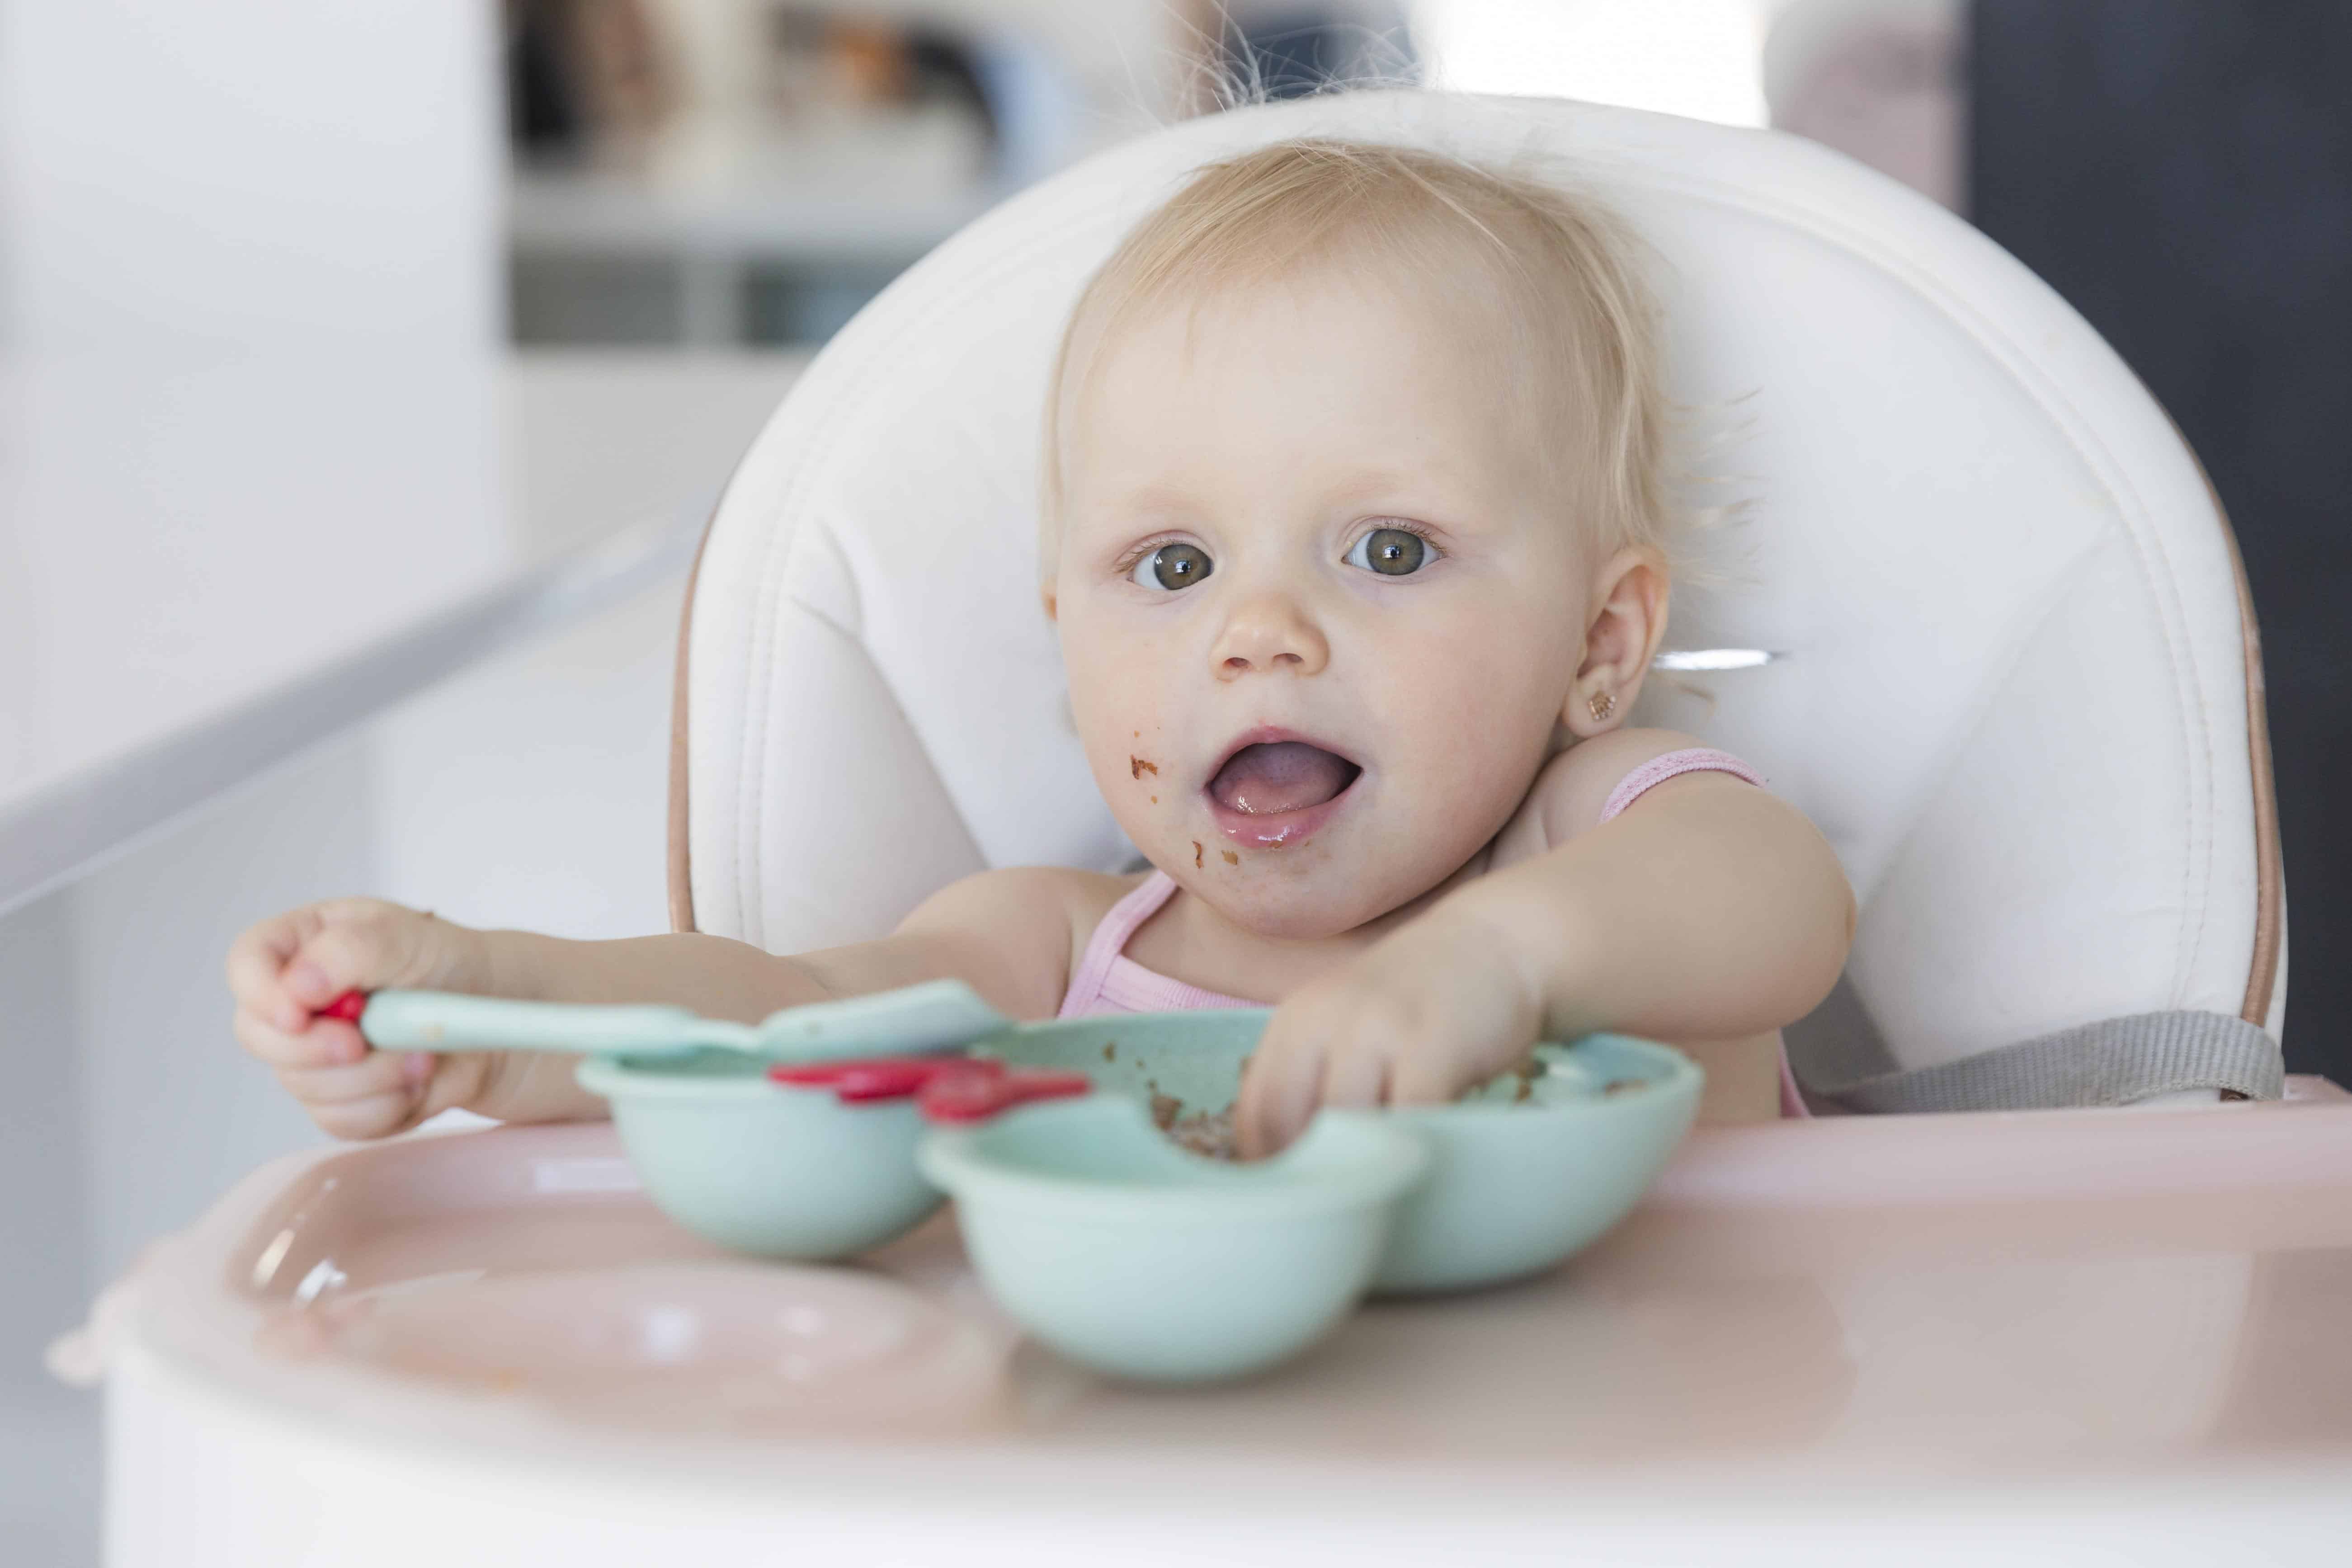 Infant and Toddler Feeding from Birth to 23 Months: Making Every Bite Count  – Food Insight